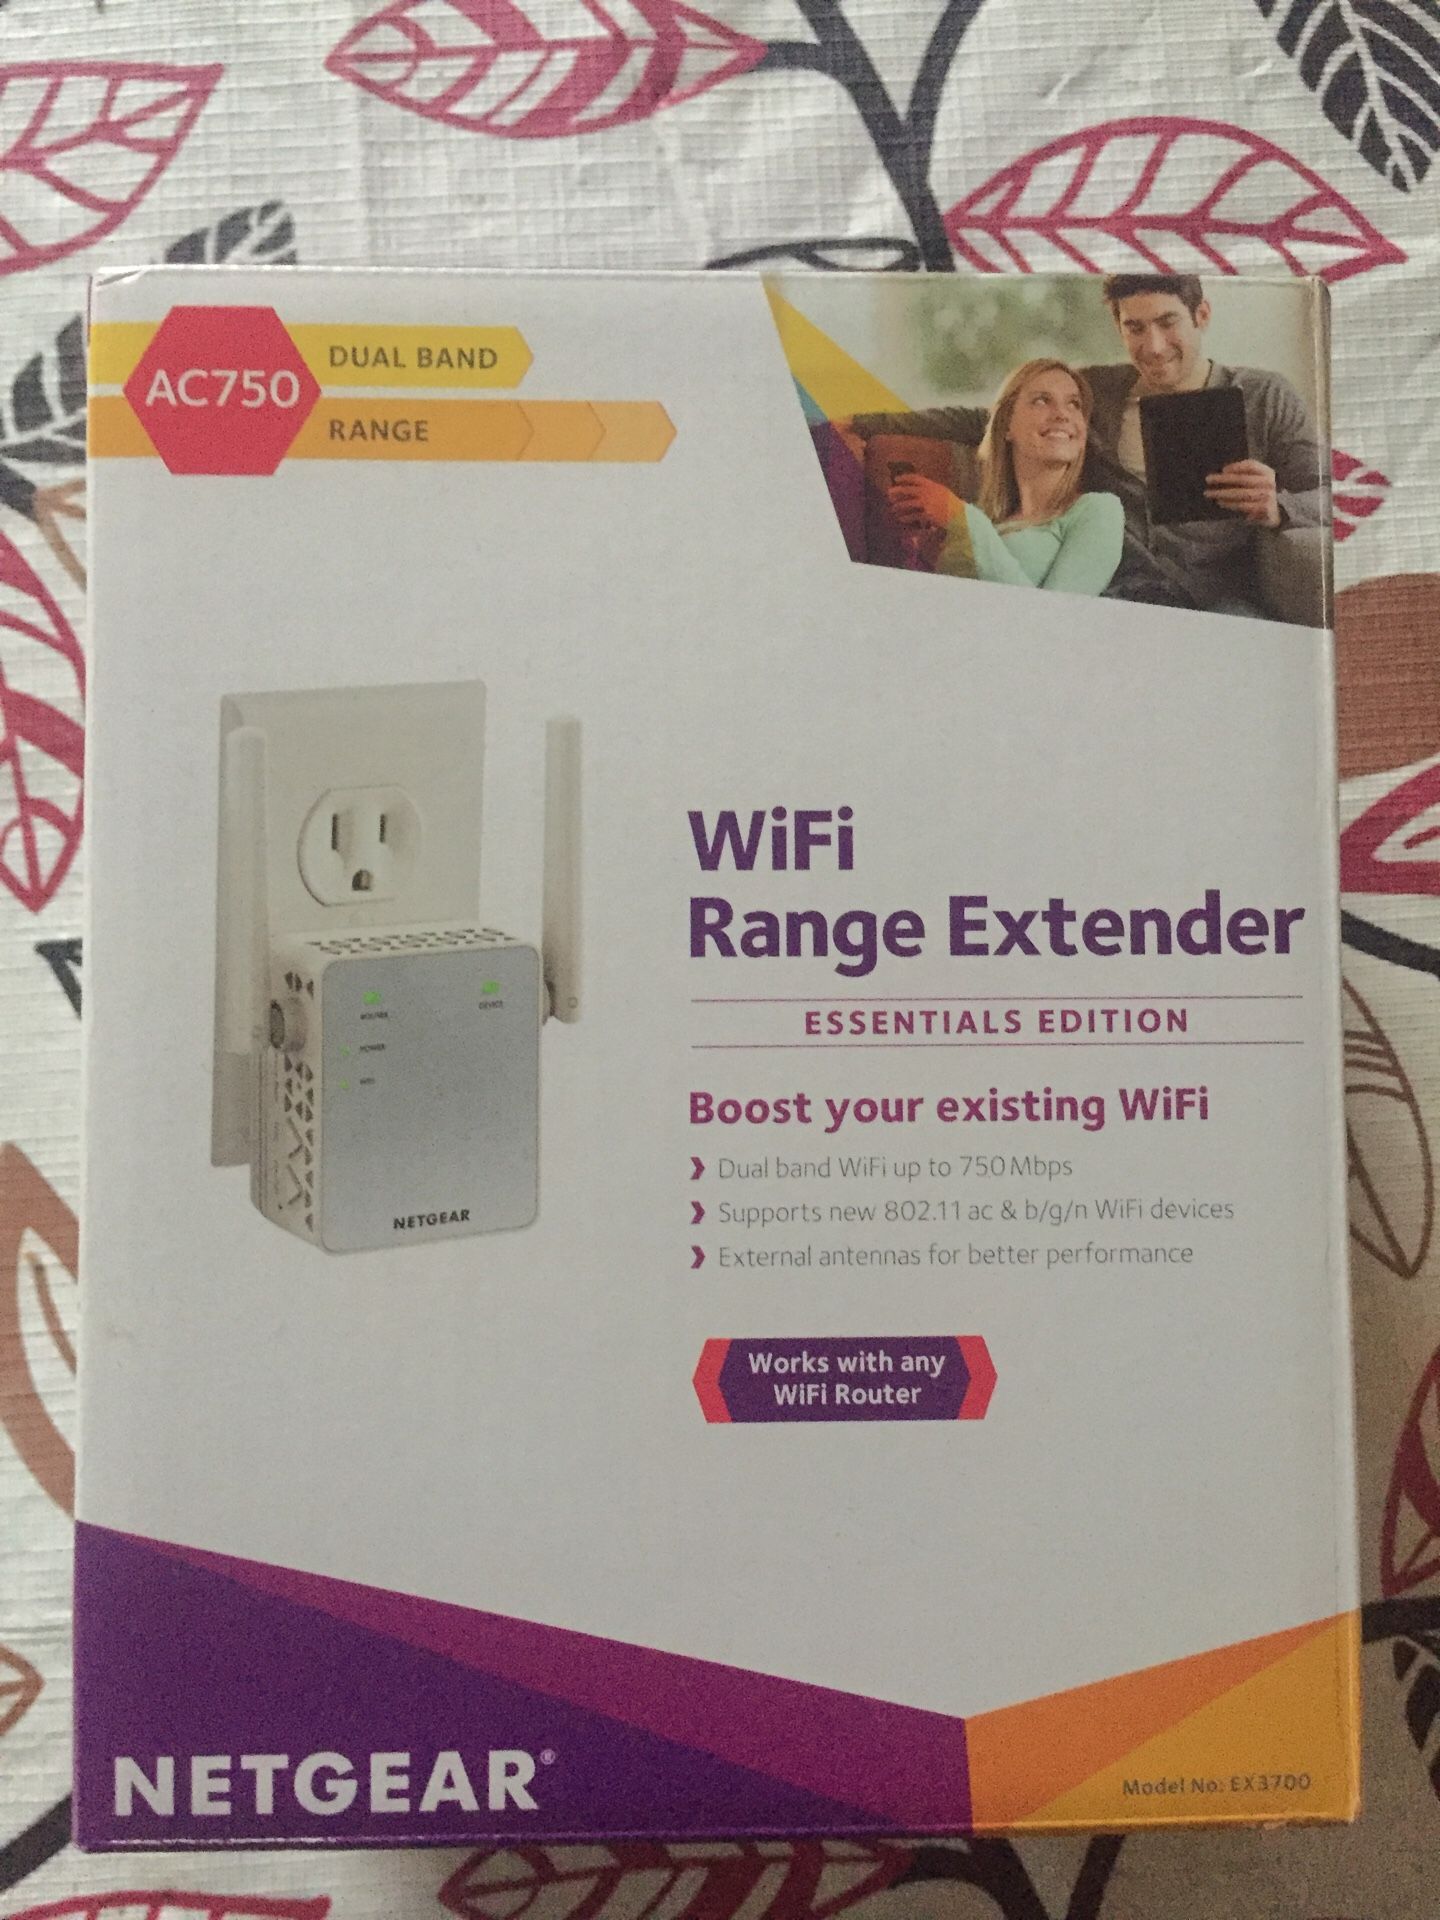 NETGEAR WiFi Range Extender AC750 Dual Band WiFi coverage up to 750Mbps (EX3700)